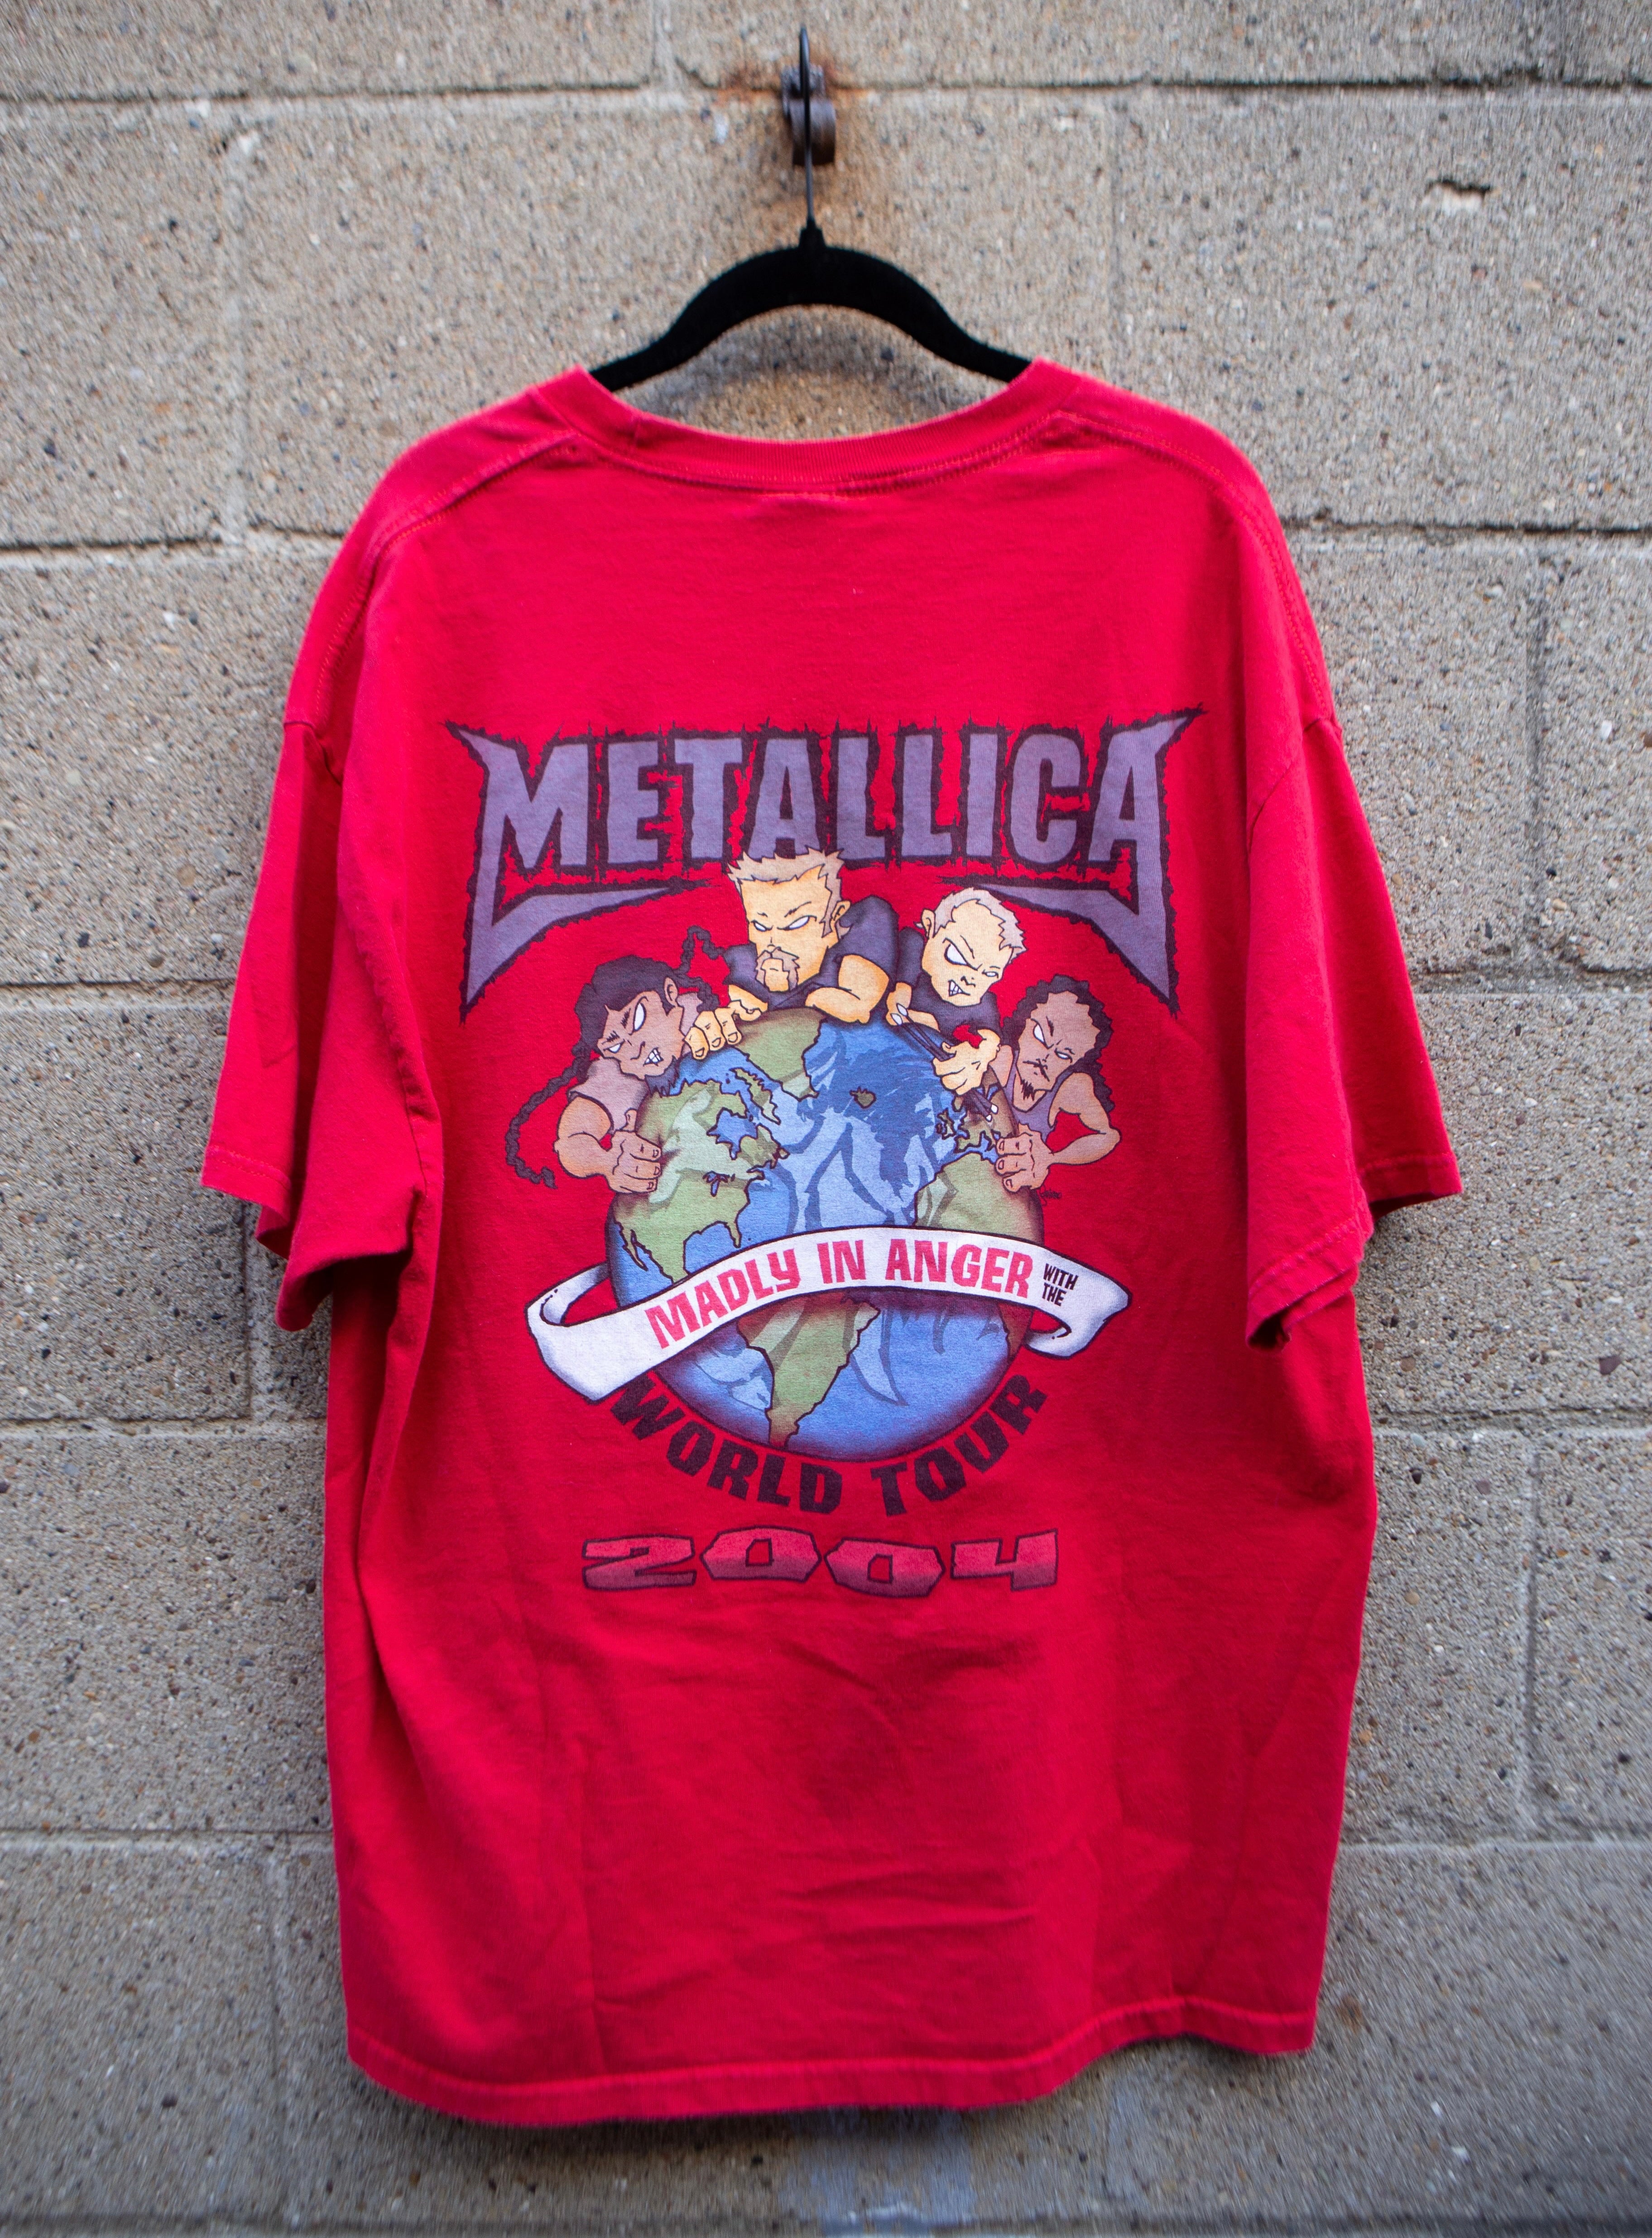 ‘04 Metallica “Madly In Anger” Tour Tee